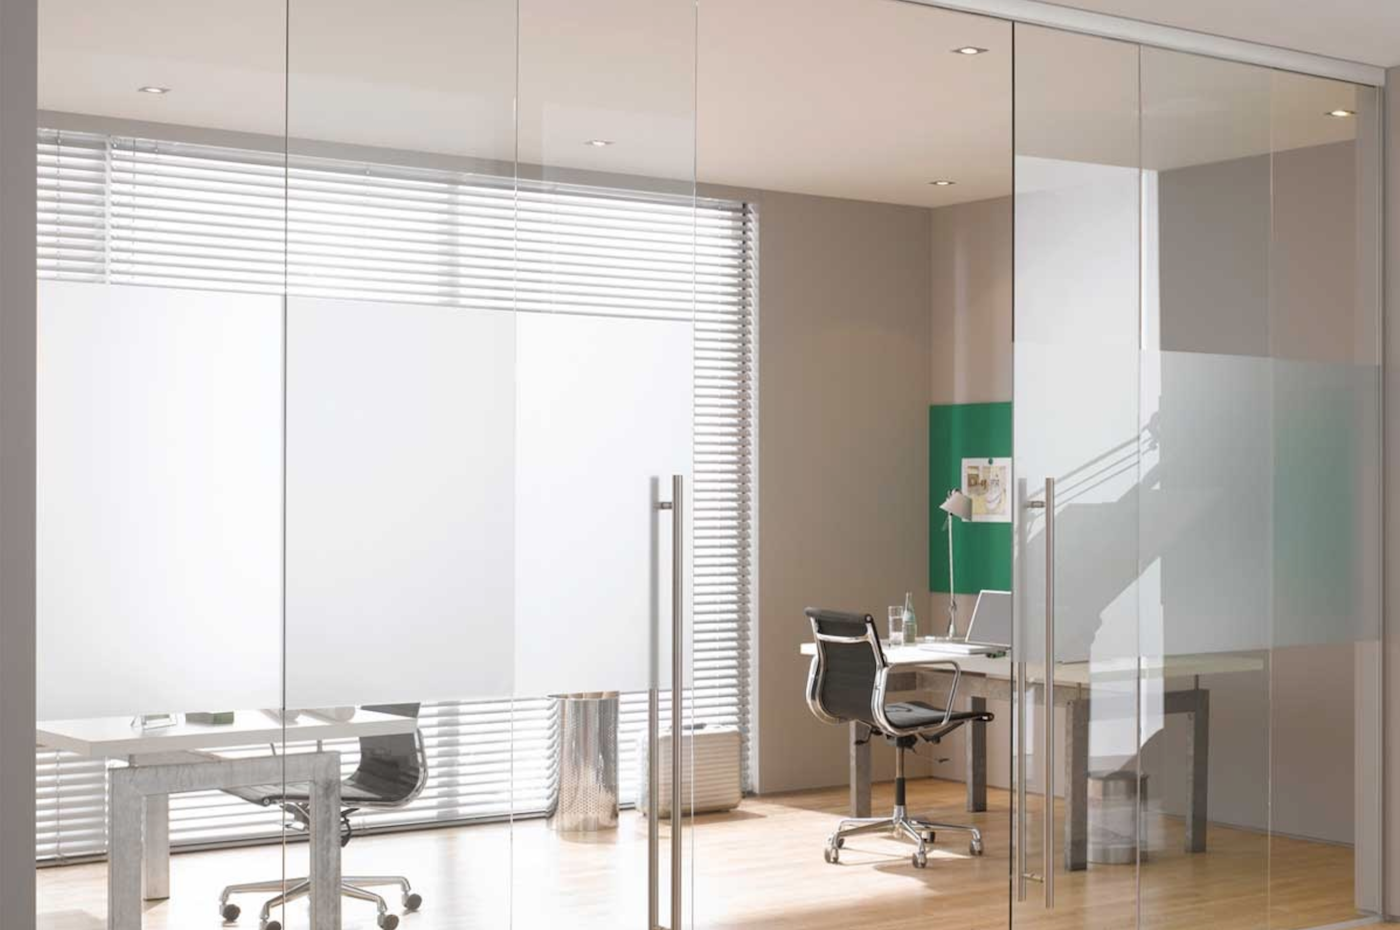 Assisted close sliding glass office doors close smoothly